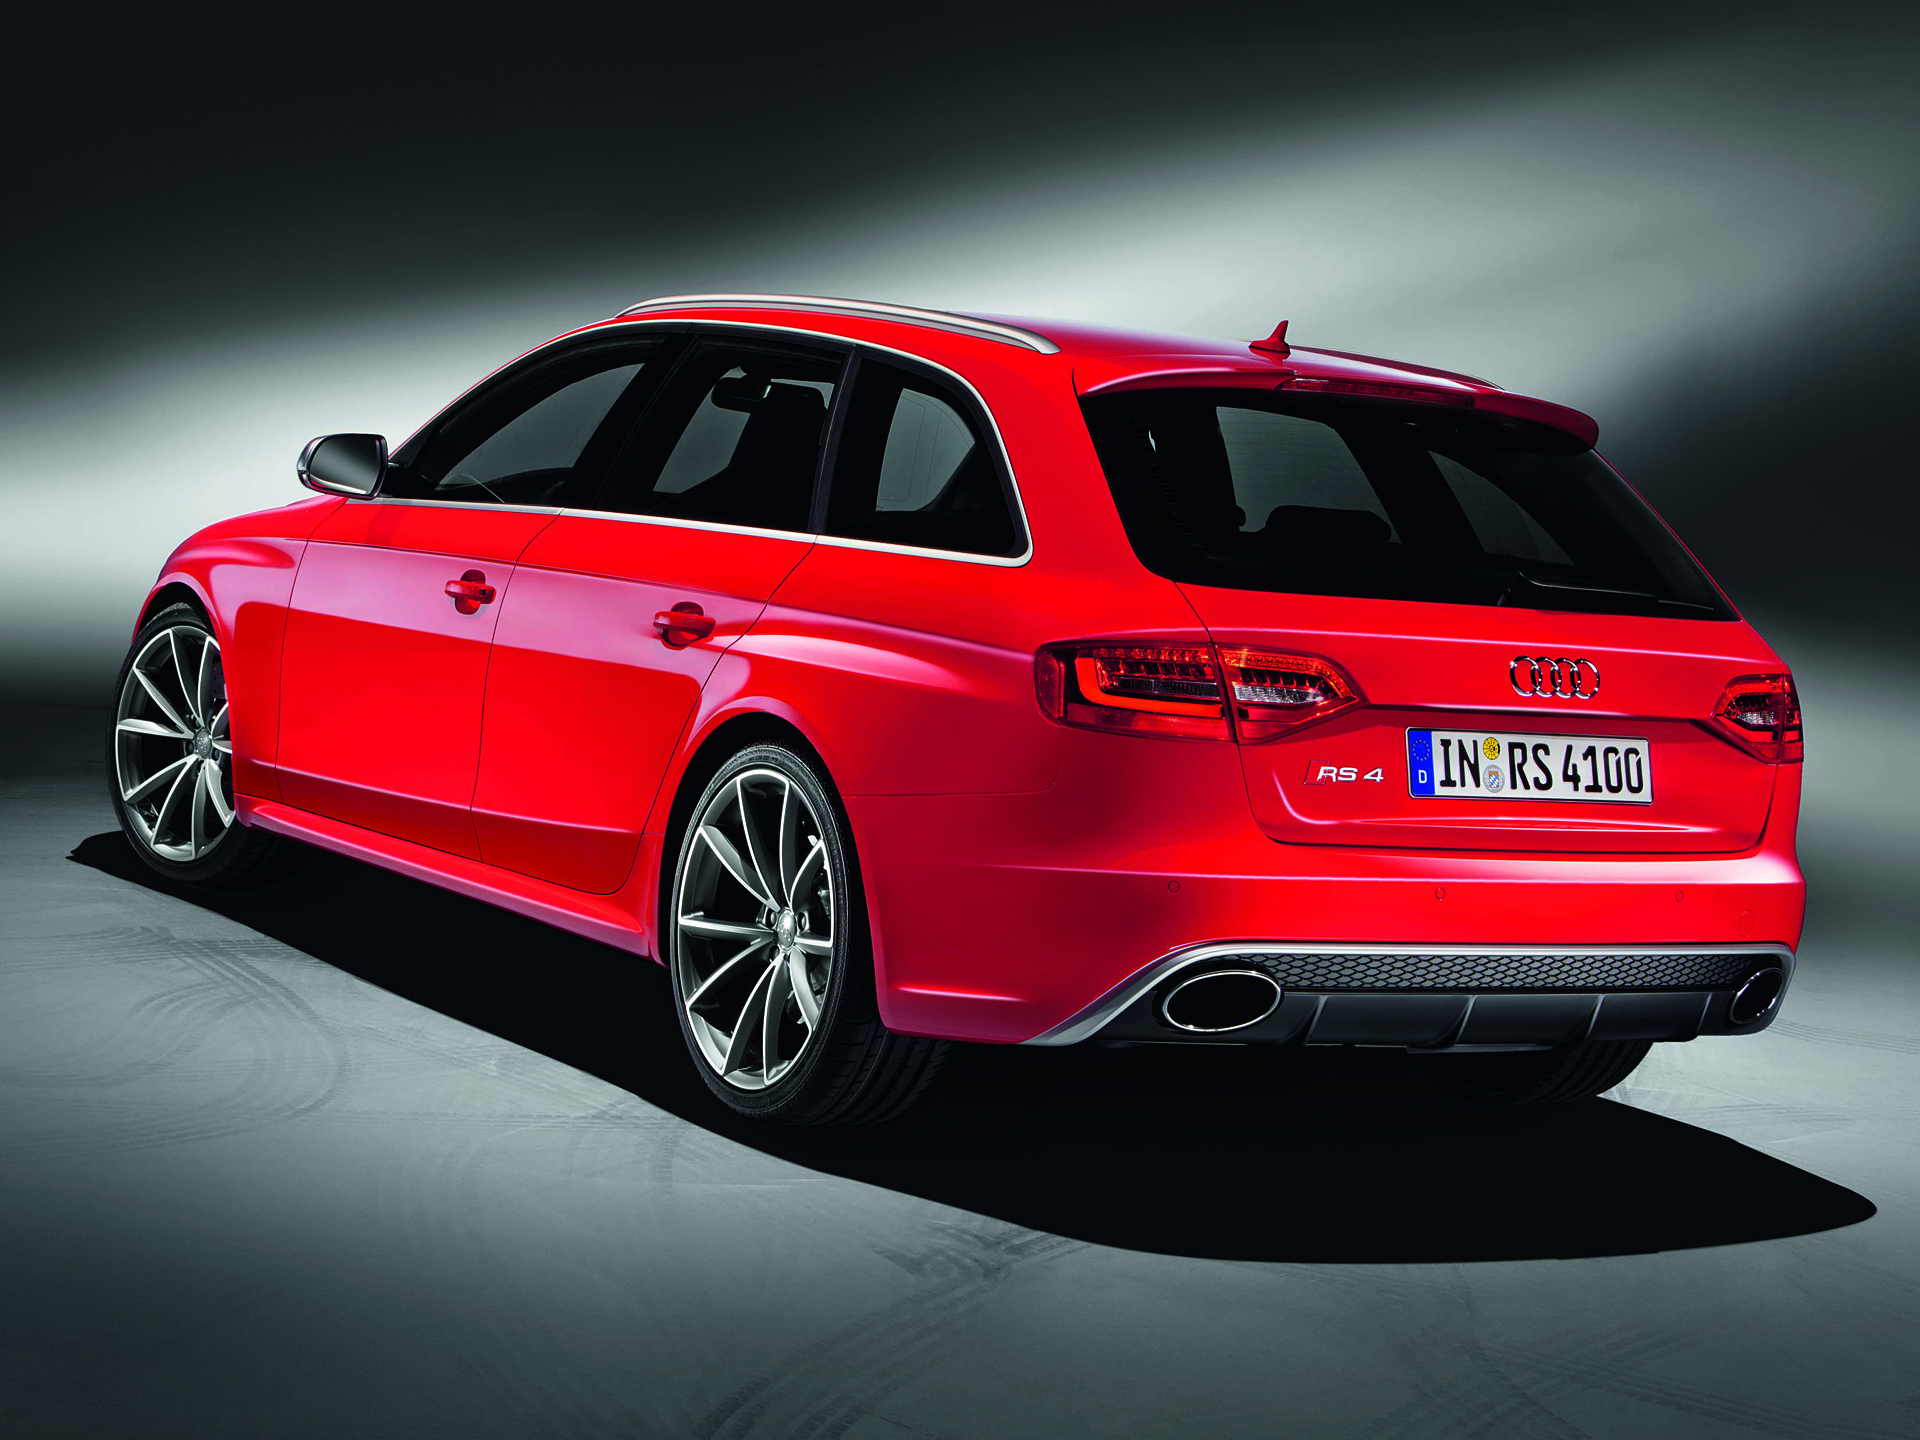 Cool Audi Rs4 Backgrounds